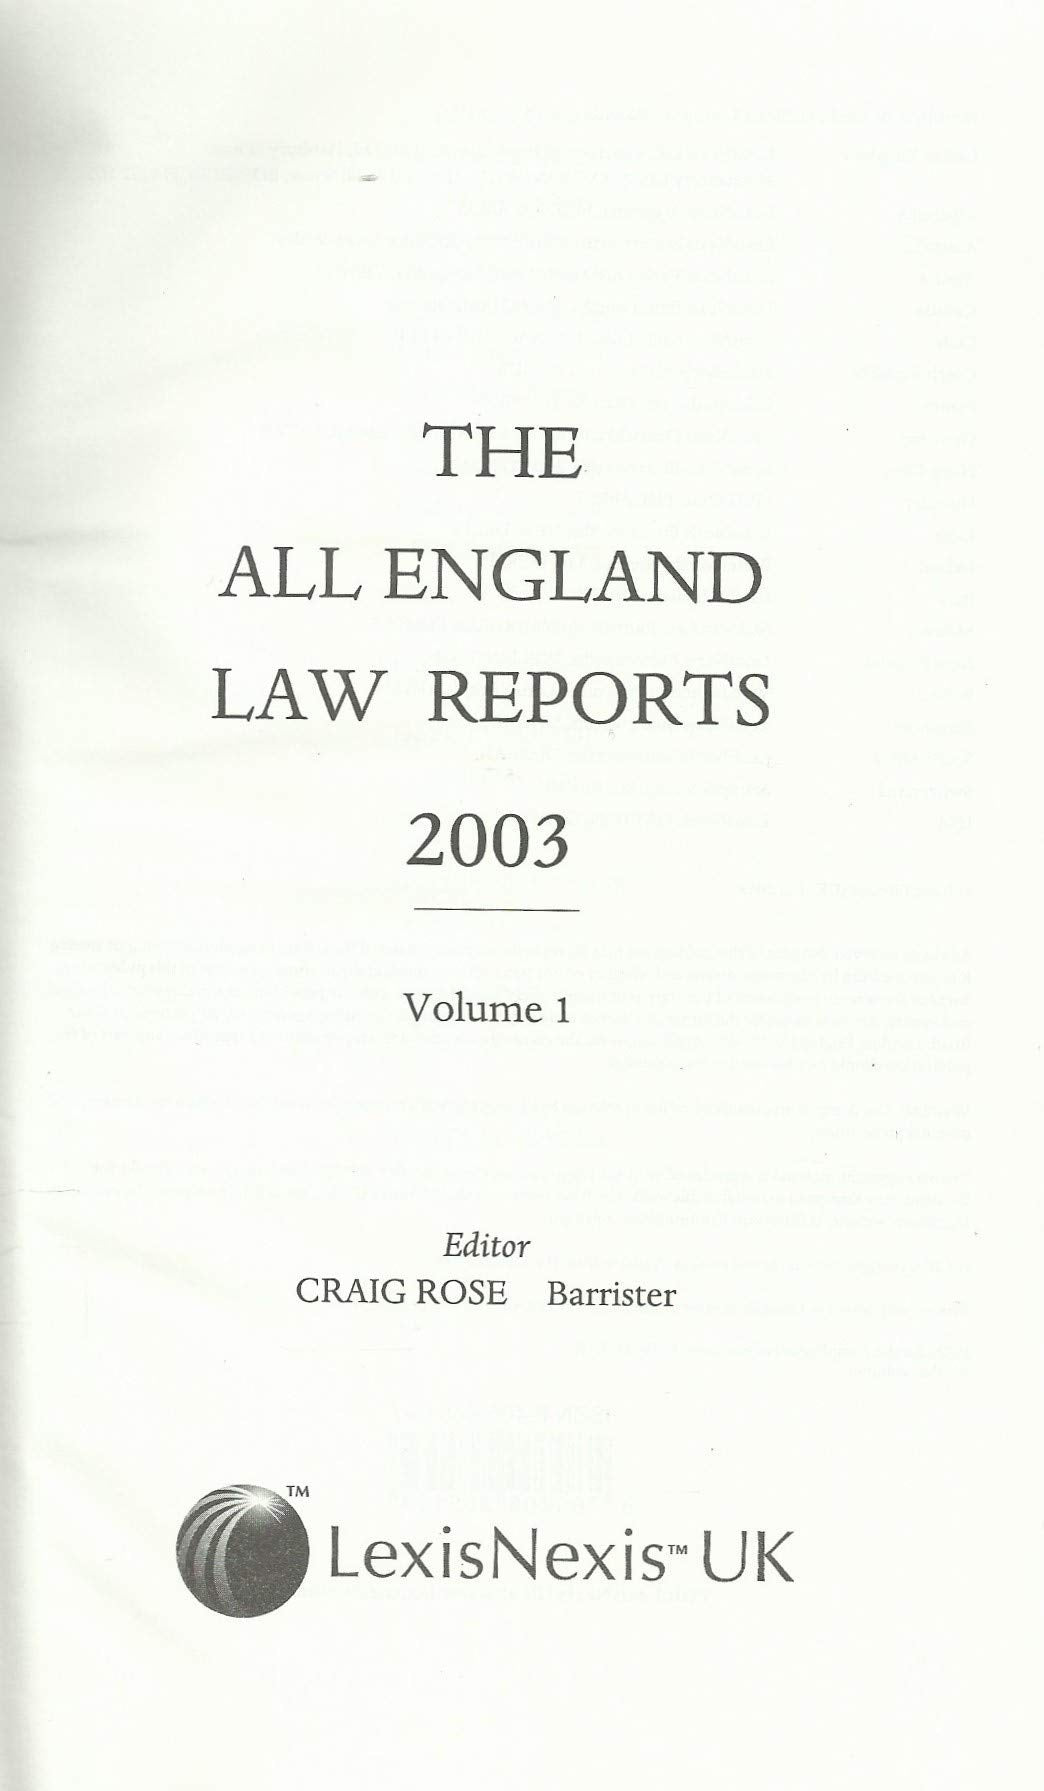 The All England Law Reports 2003, Volume 1